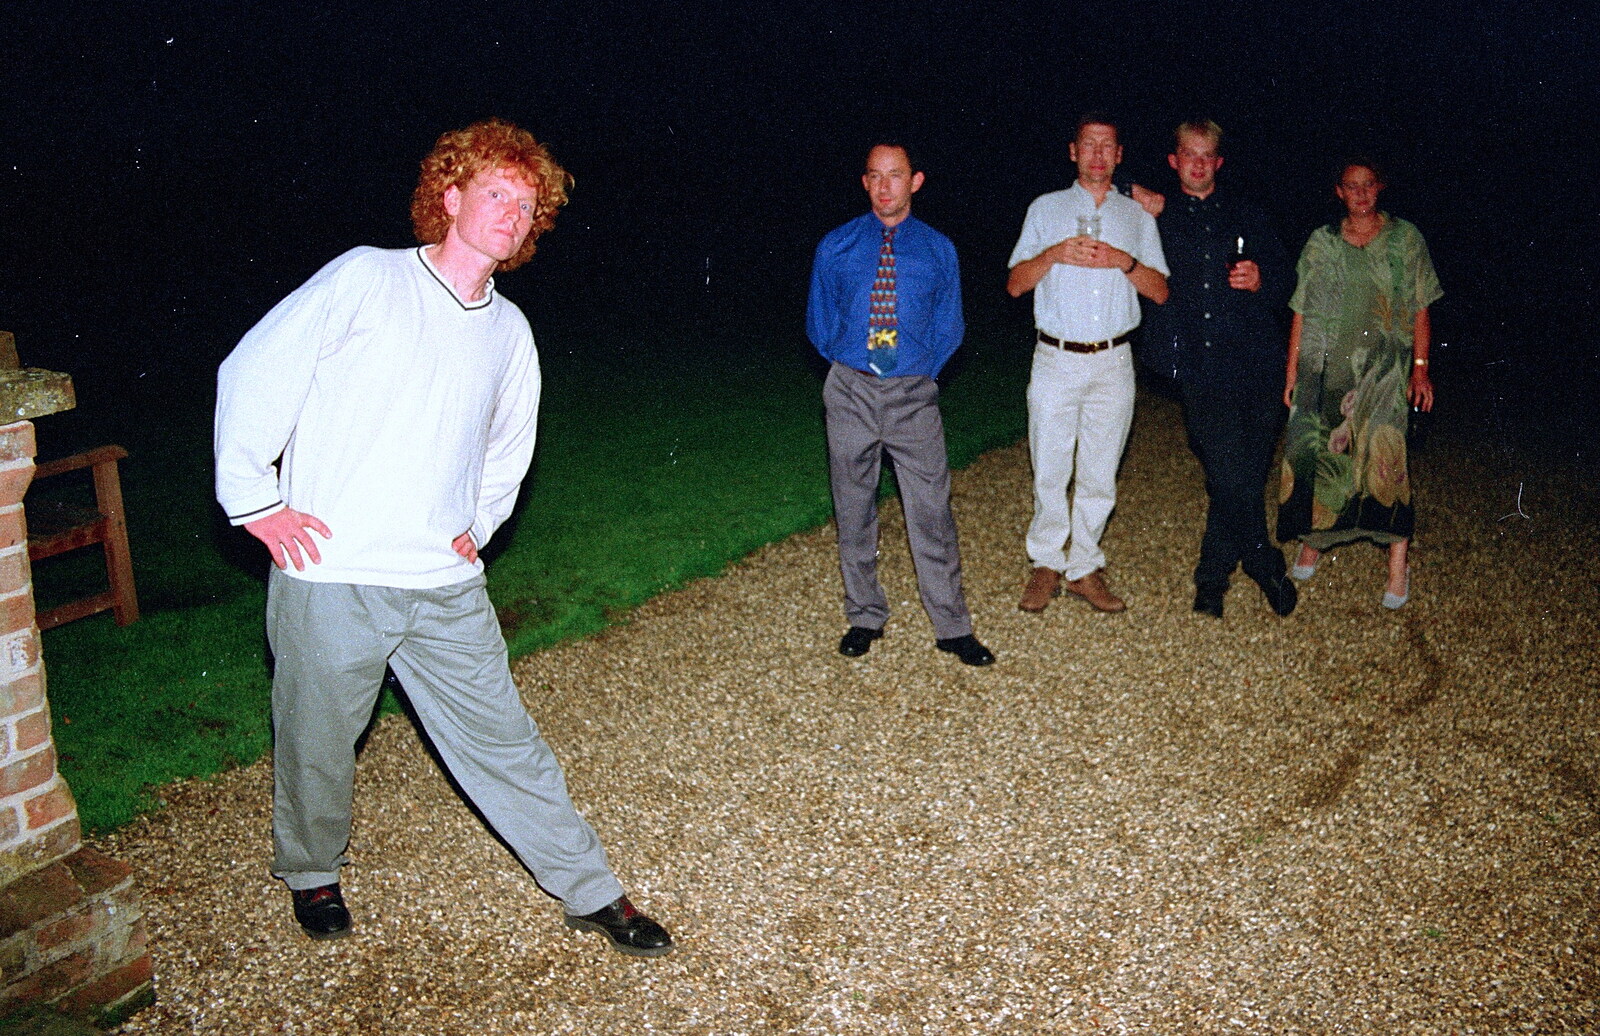 Wavy shows off his smart sweater from Helen and Neil's Wedding, The Oaksmere, Brome, Suffolk - 4th August 2000